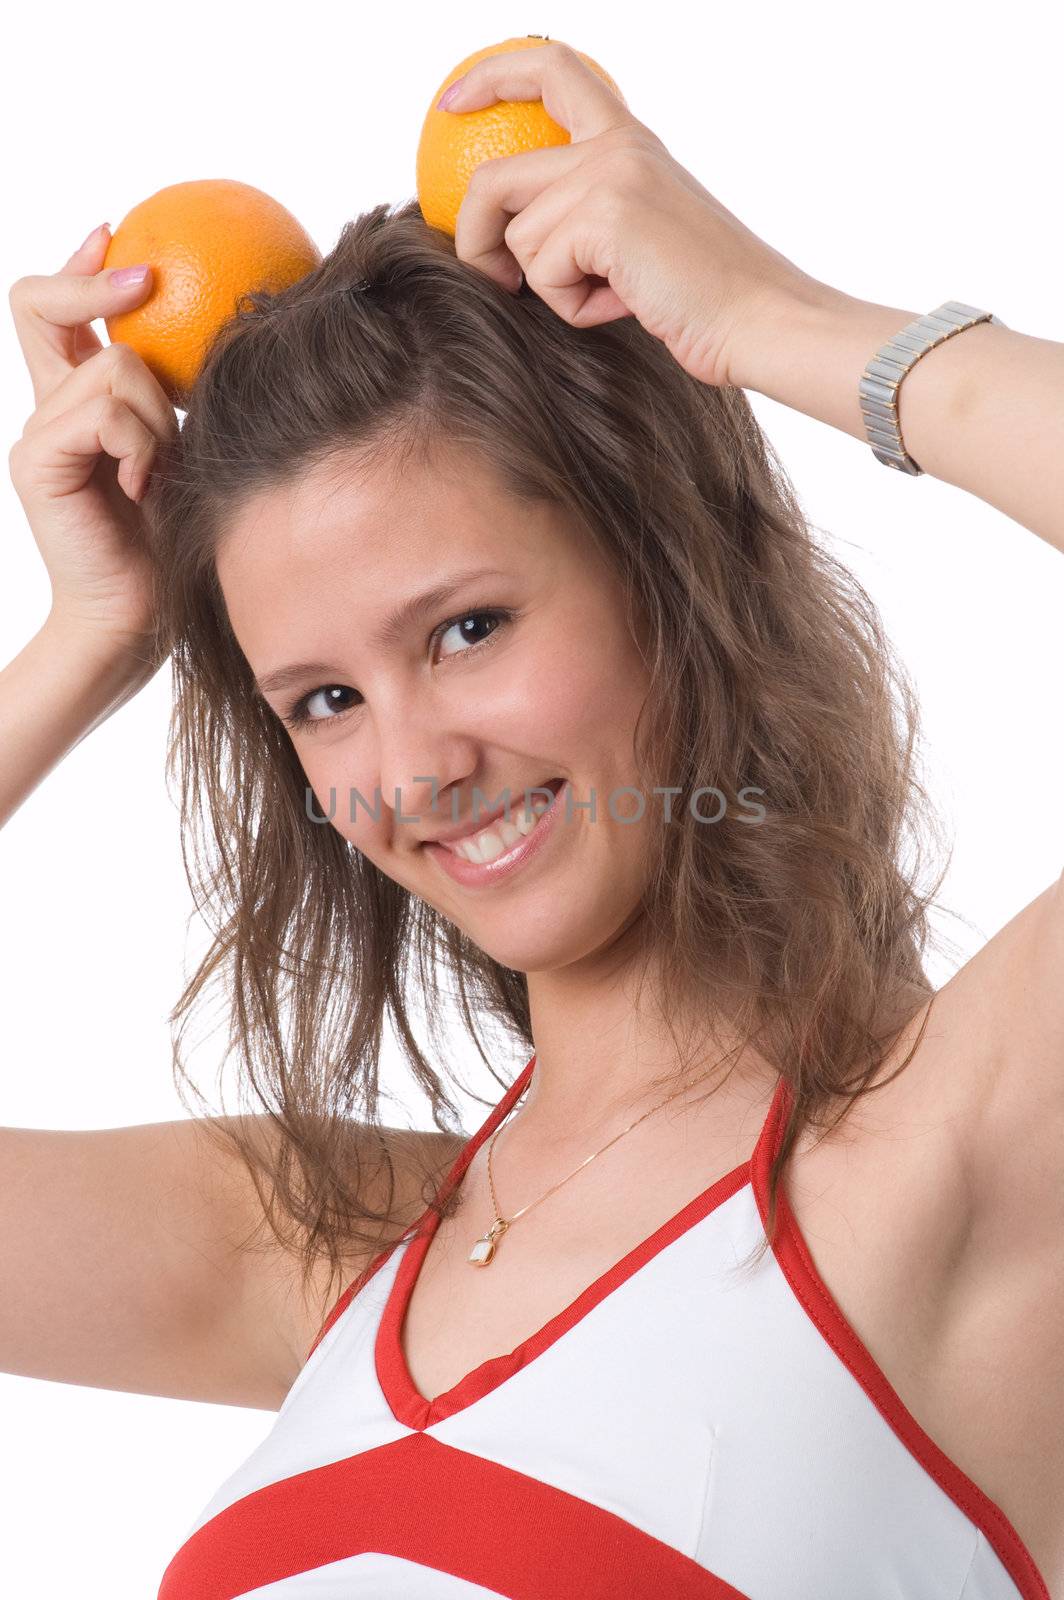 The brown-eyed girl on a white background holds oranges